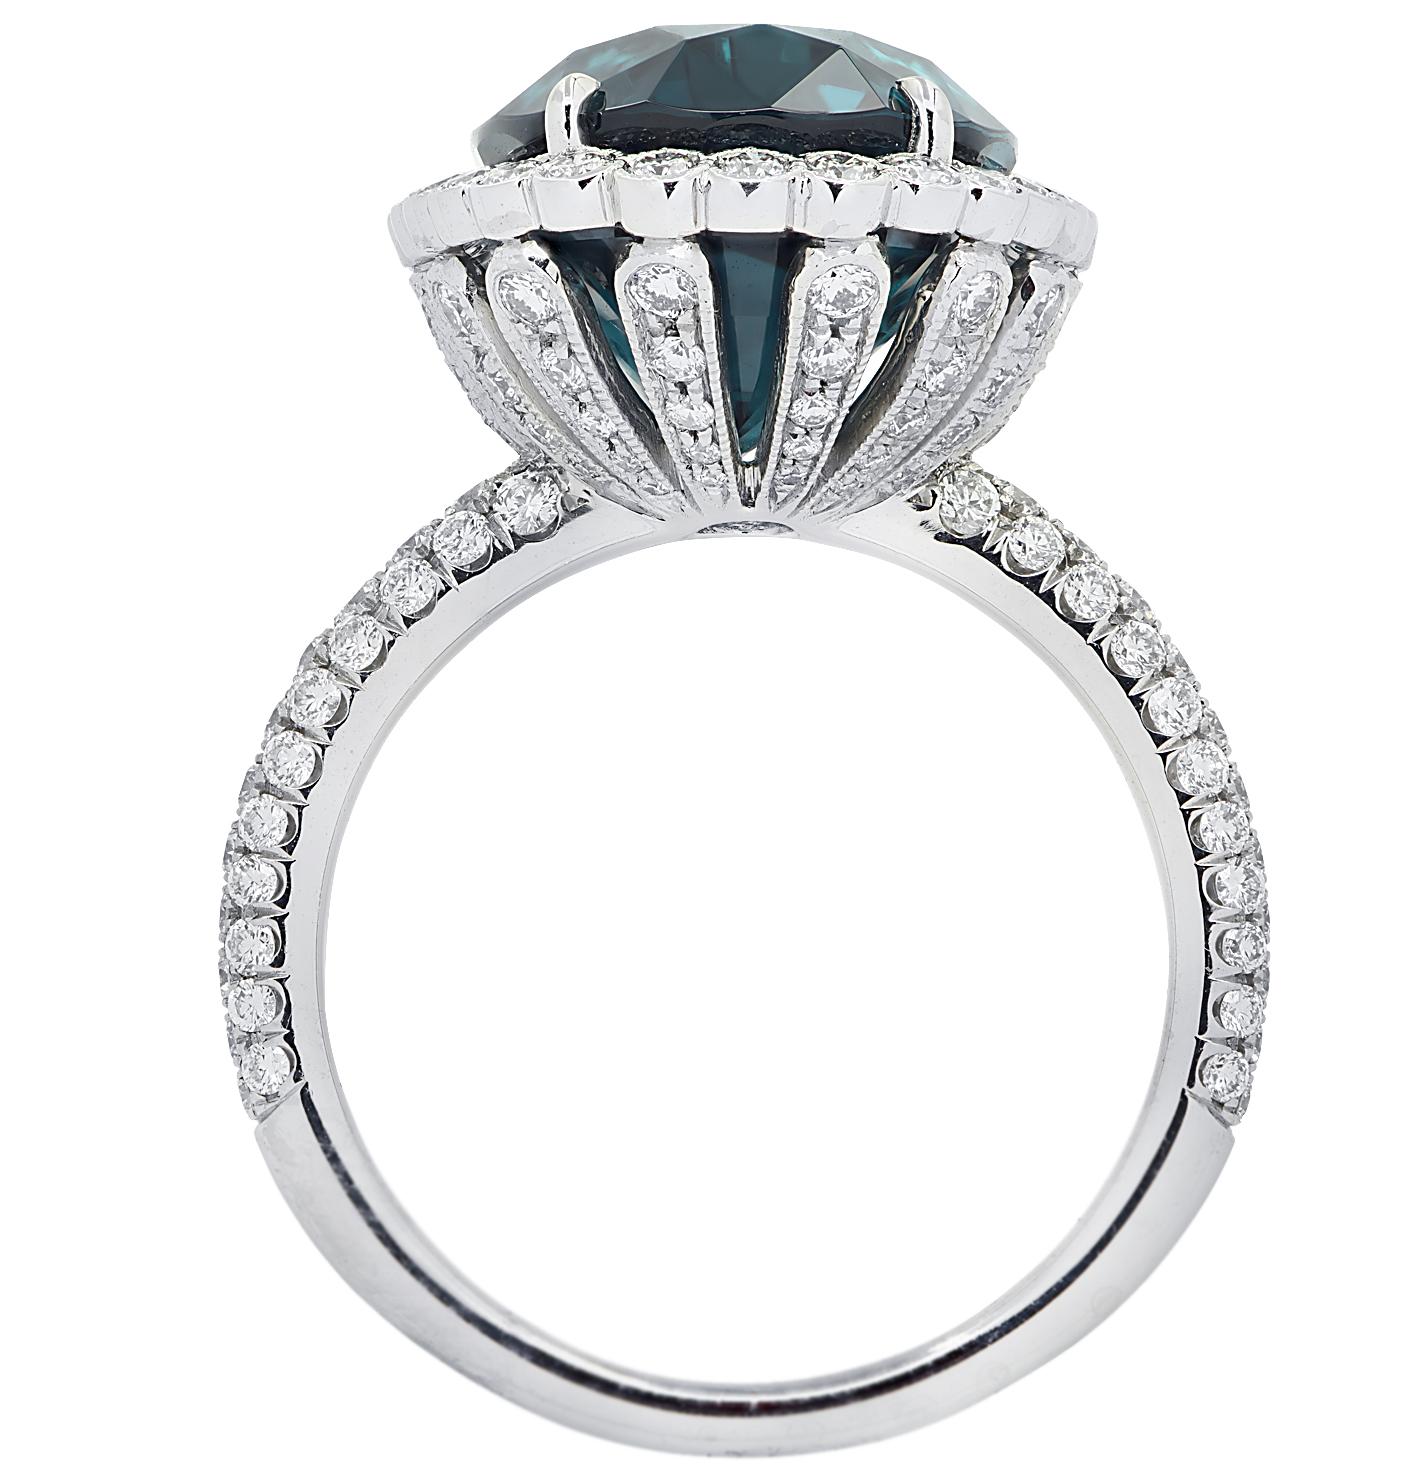 A masterpiece from the esteemed house of Tiffany & Co., this Soleste ring, meticulously crafted in luminous platinum, is the epitome of elegance and sophistication. At the heart of this exquisite piece is an entrancing oval-shaped indicolite